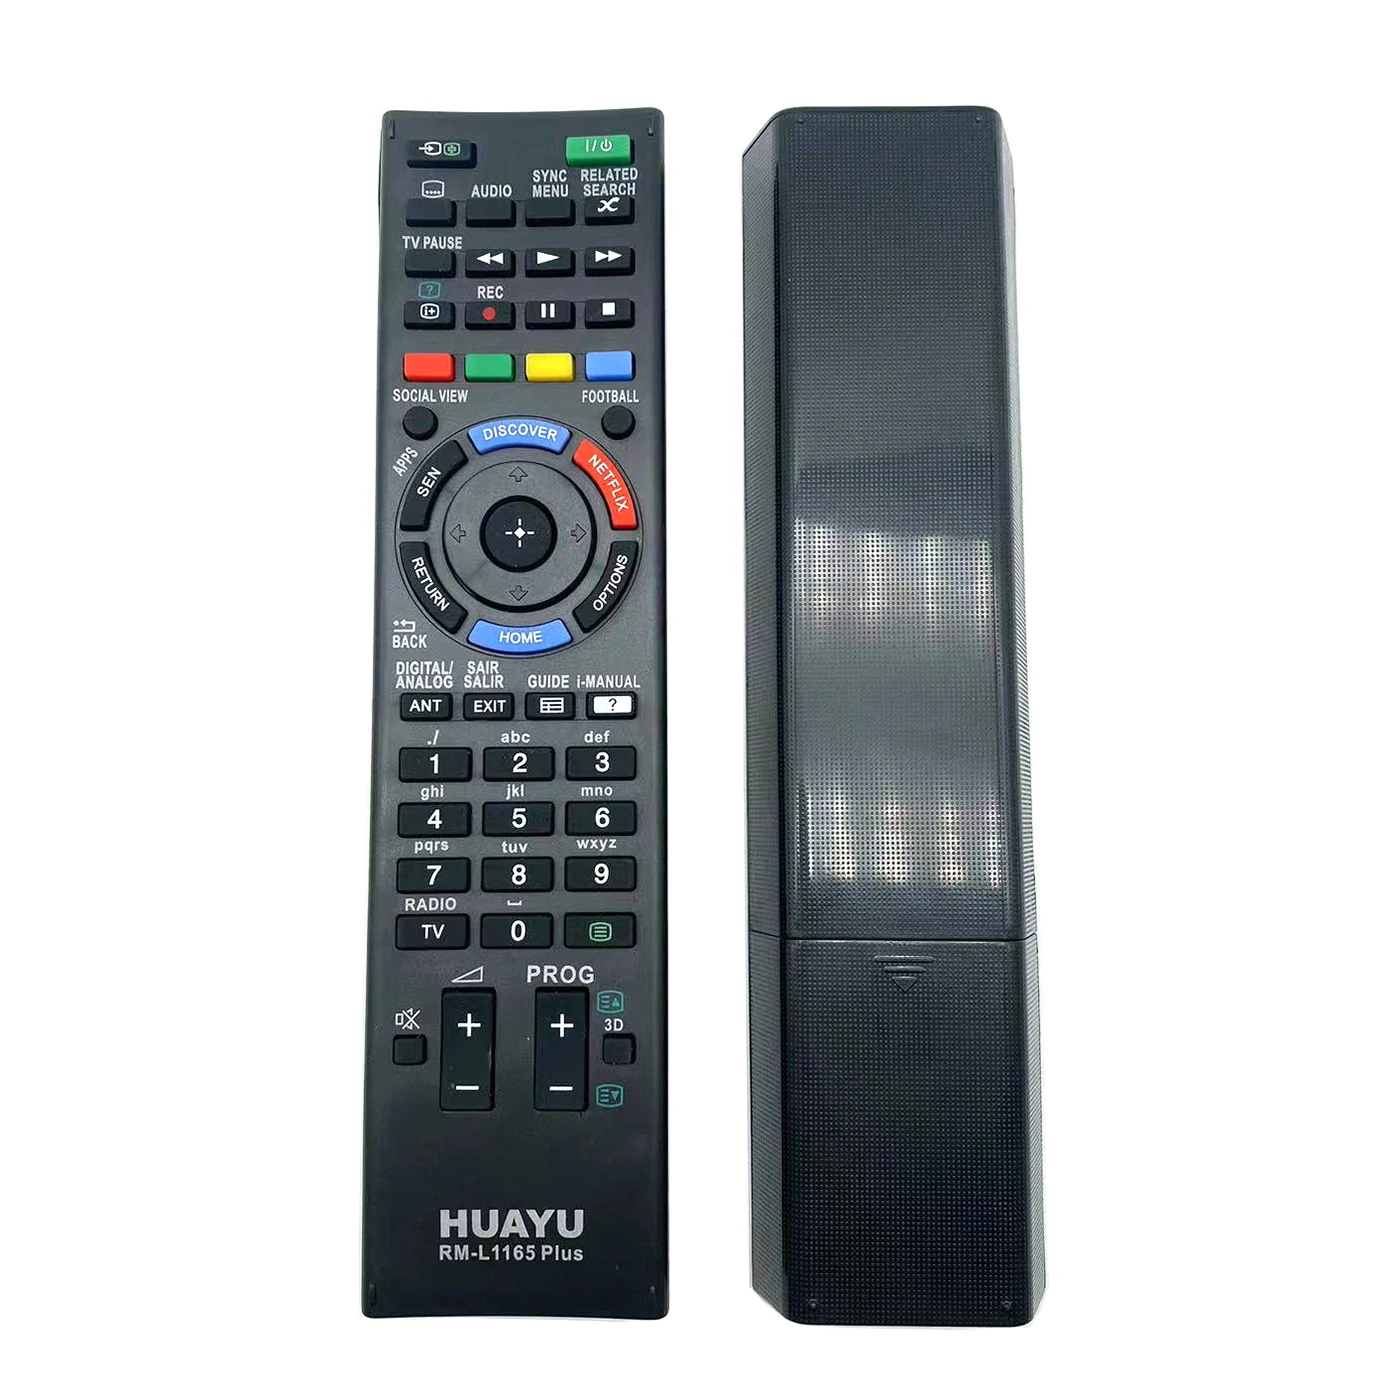 Remote control Replace For Sony RM-ED061 KDL-48W585B KDL-42W705B KDL-32W705B KDL-32W603A KDL-32W605A KDL-32W650A